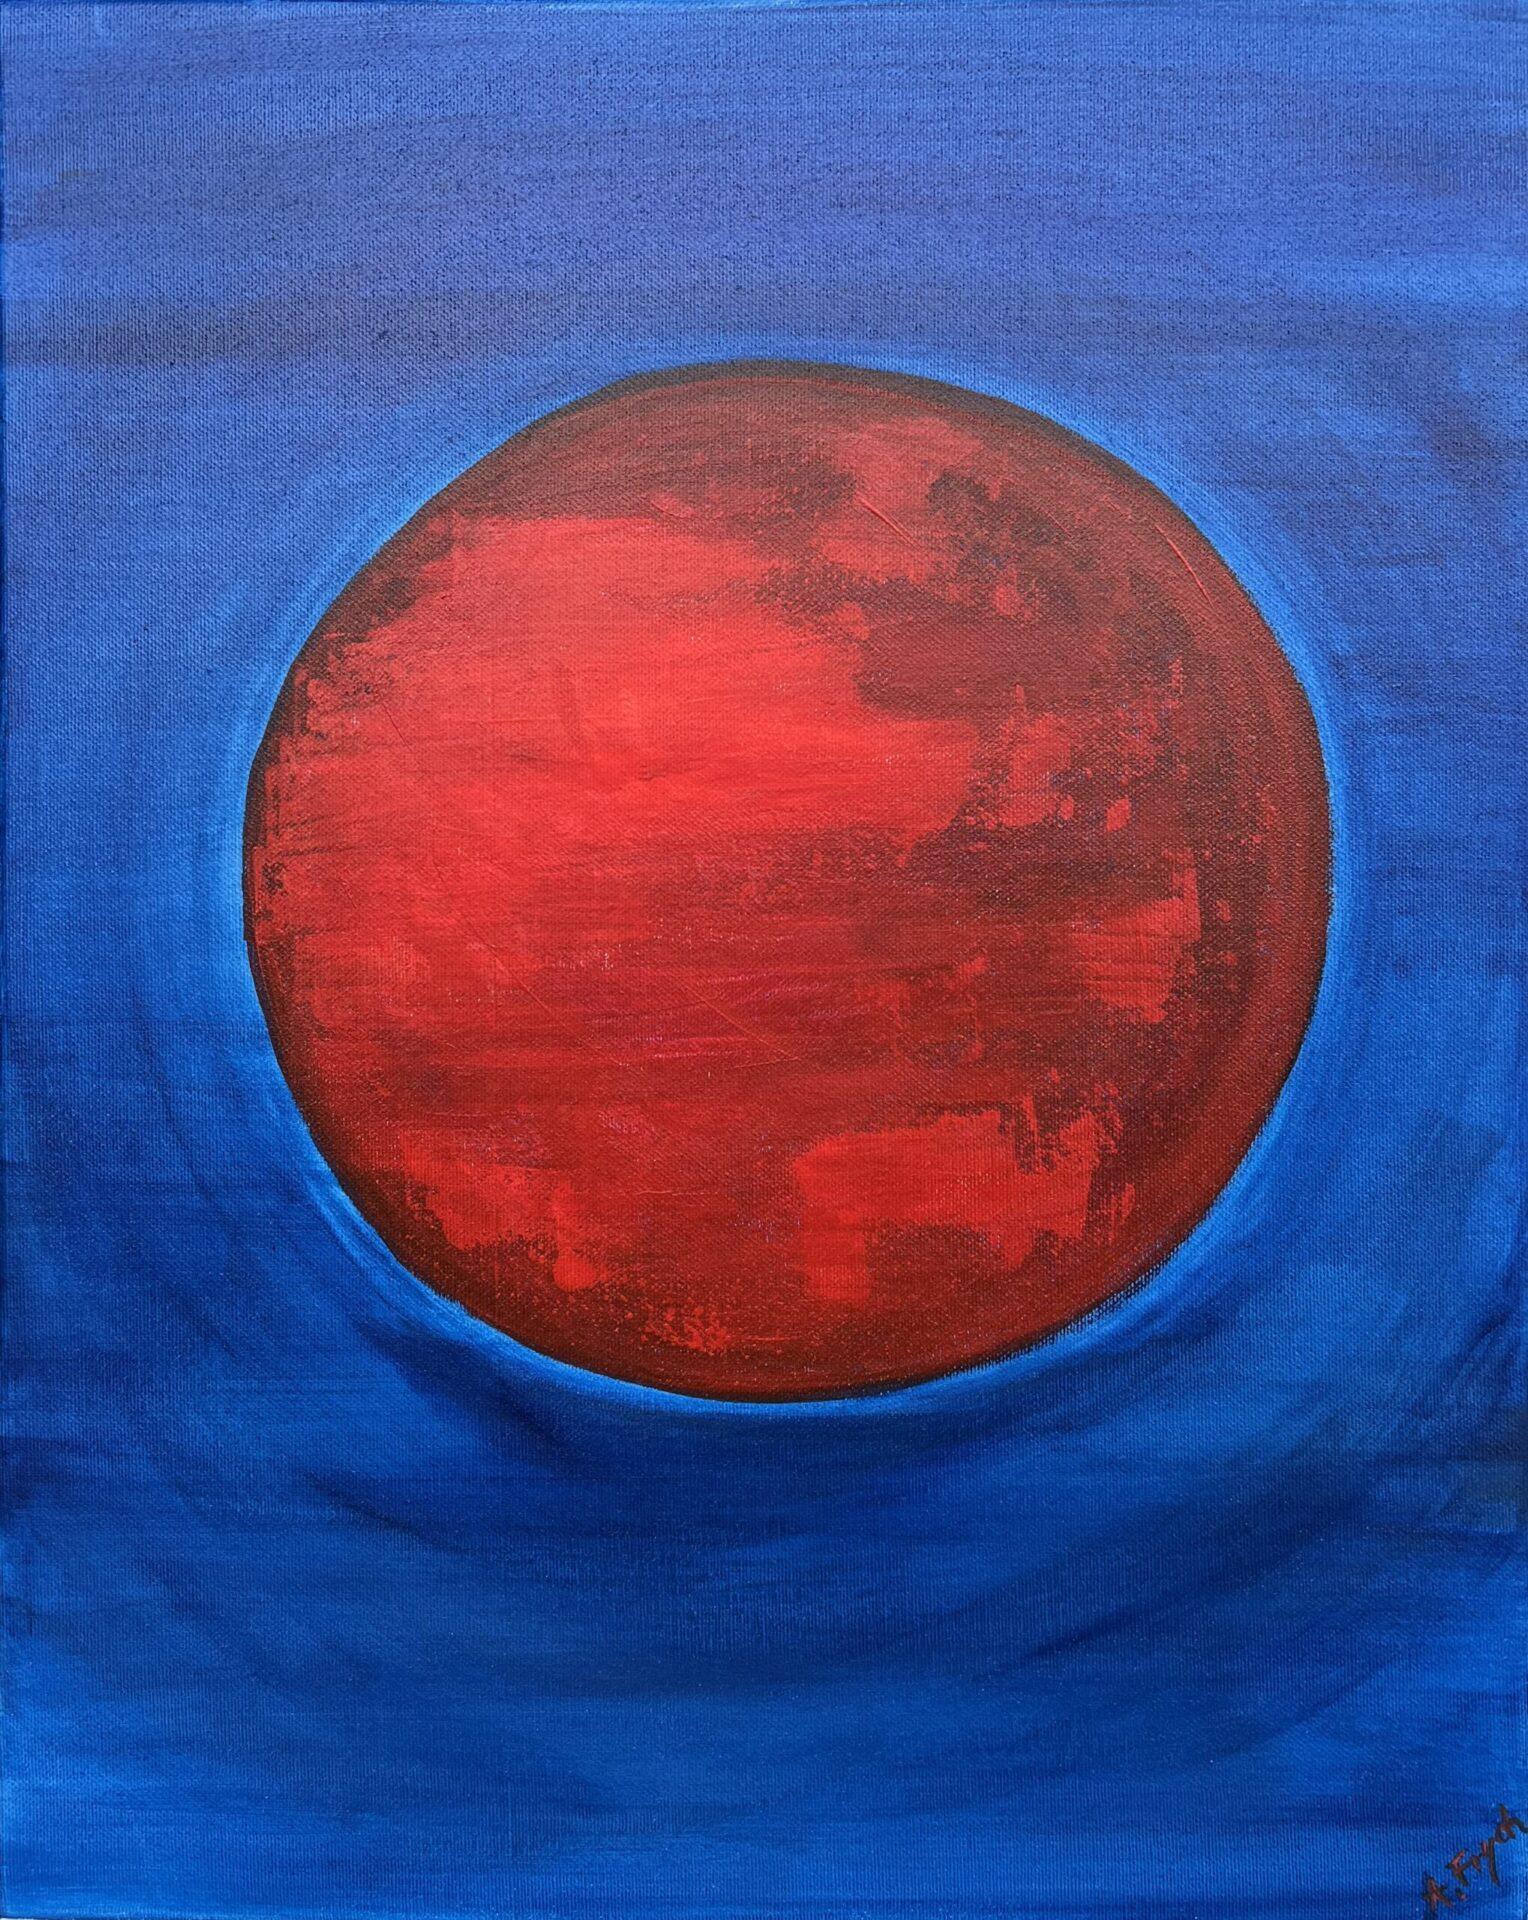 Red moon - Painting by Anna Fryszkowska